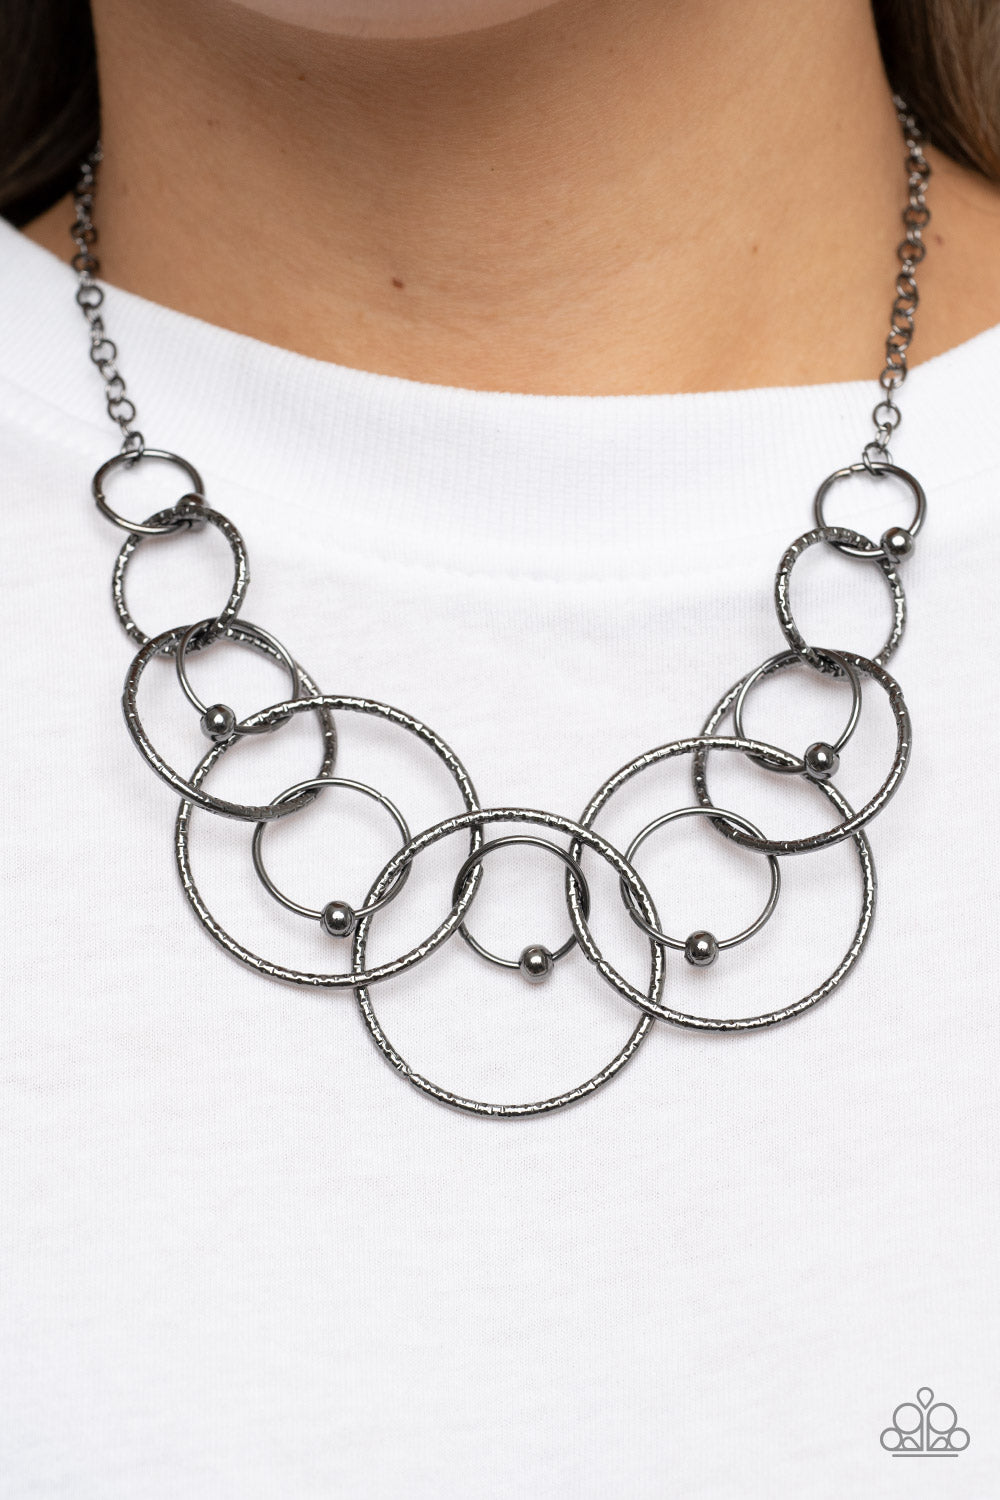 Encircled in Elegance - Black Necklace - Paparazzi Accessories